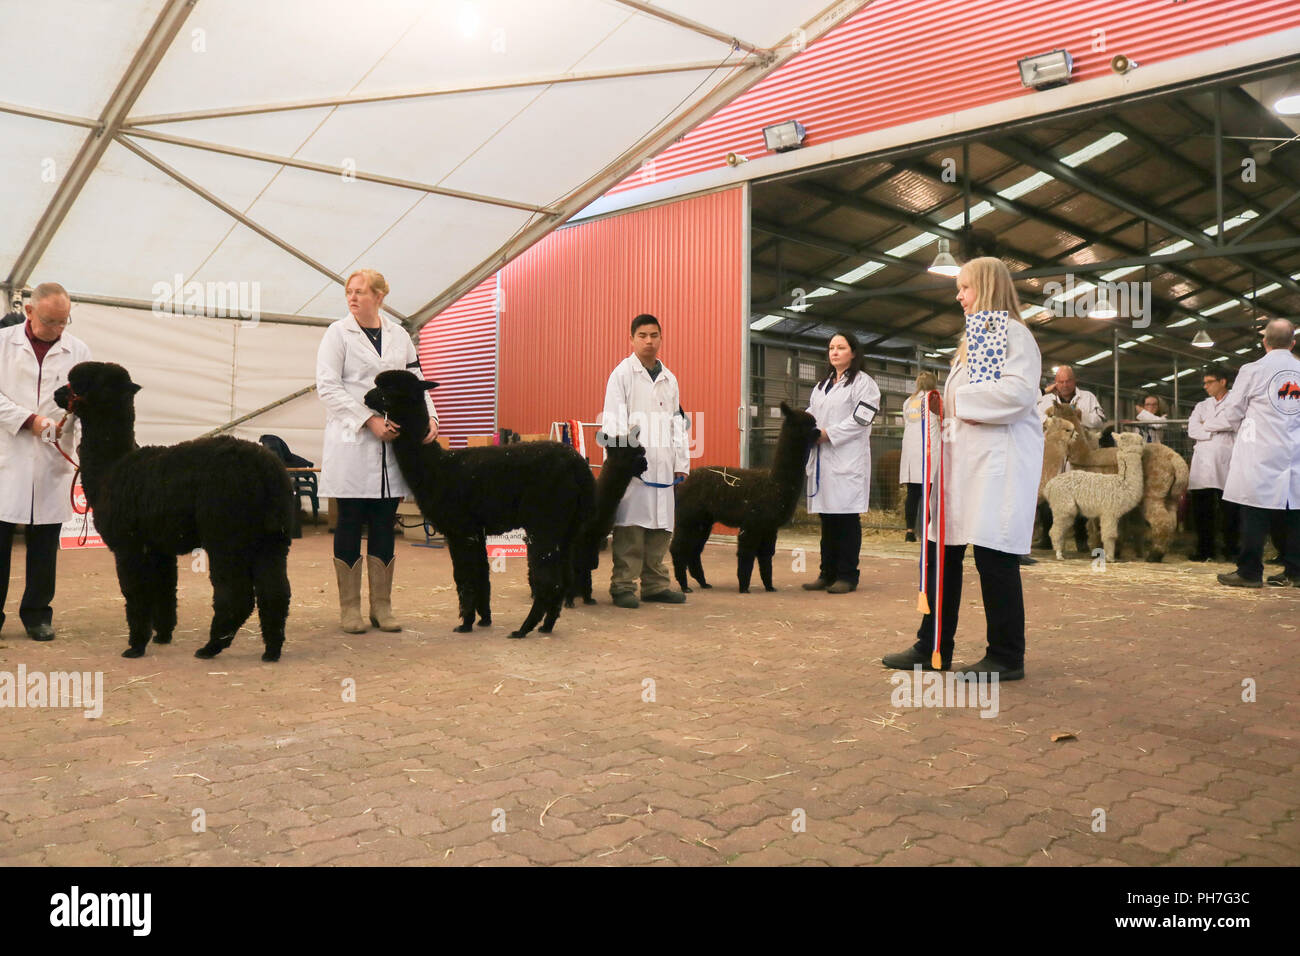 Adelaide Australia.31 August 2018.  The Royal Adelaide Show  the annual agricultural event run by the Royal Agricultural and Horticultural Society of South Australia  opens at the showgrounds from 31 August-9 September showcasing  local produce,Cookery competitions, animals, rides, food and  entertainment and judging livestock Credit: amer ghazzal/Alamy Live News Stock Photo